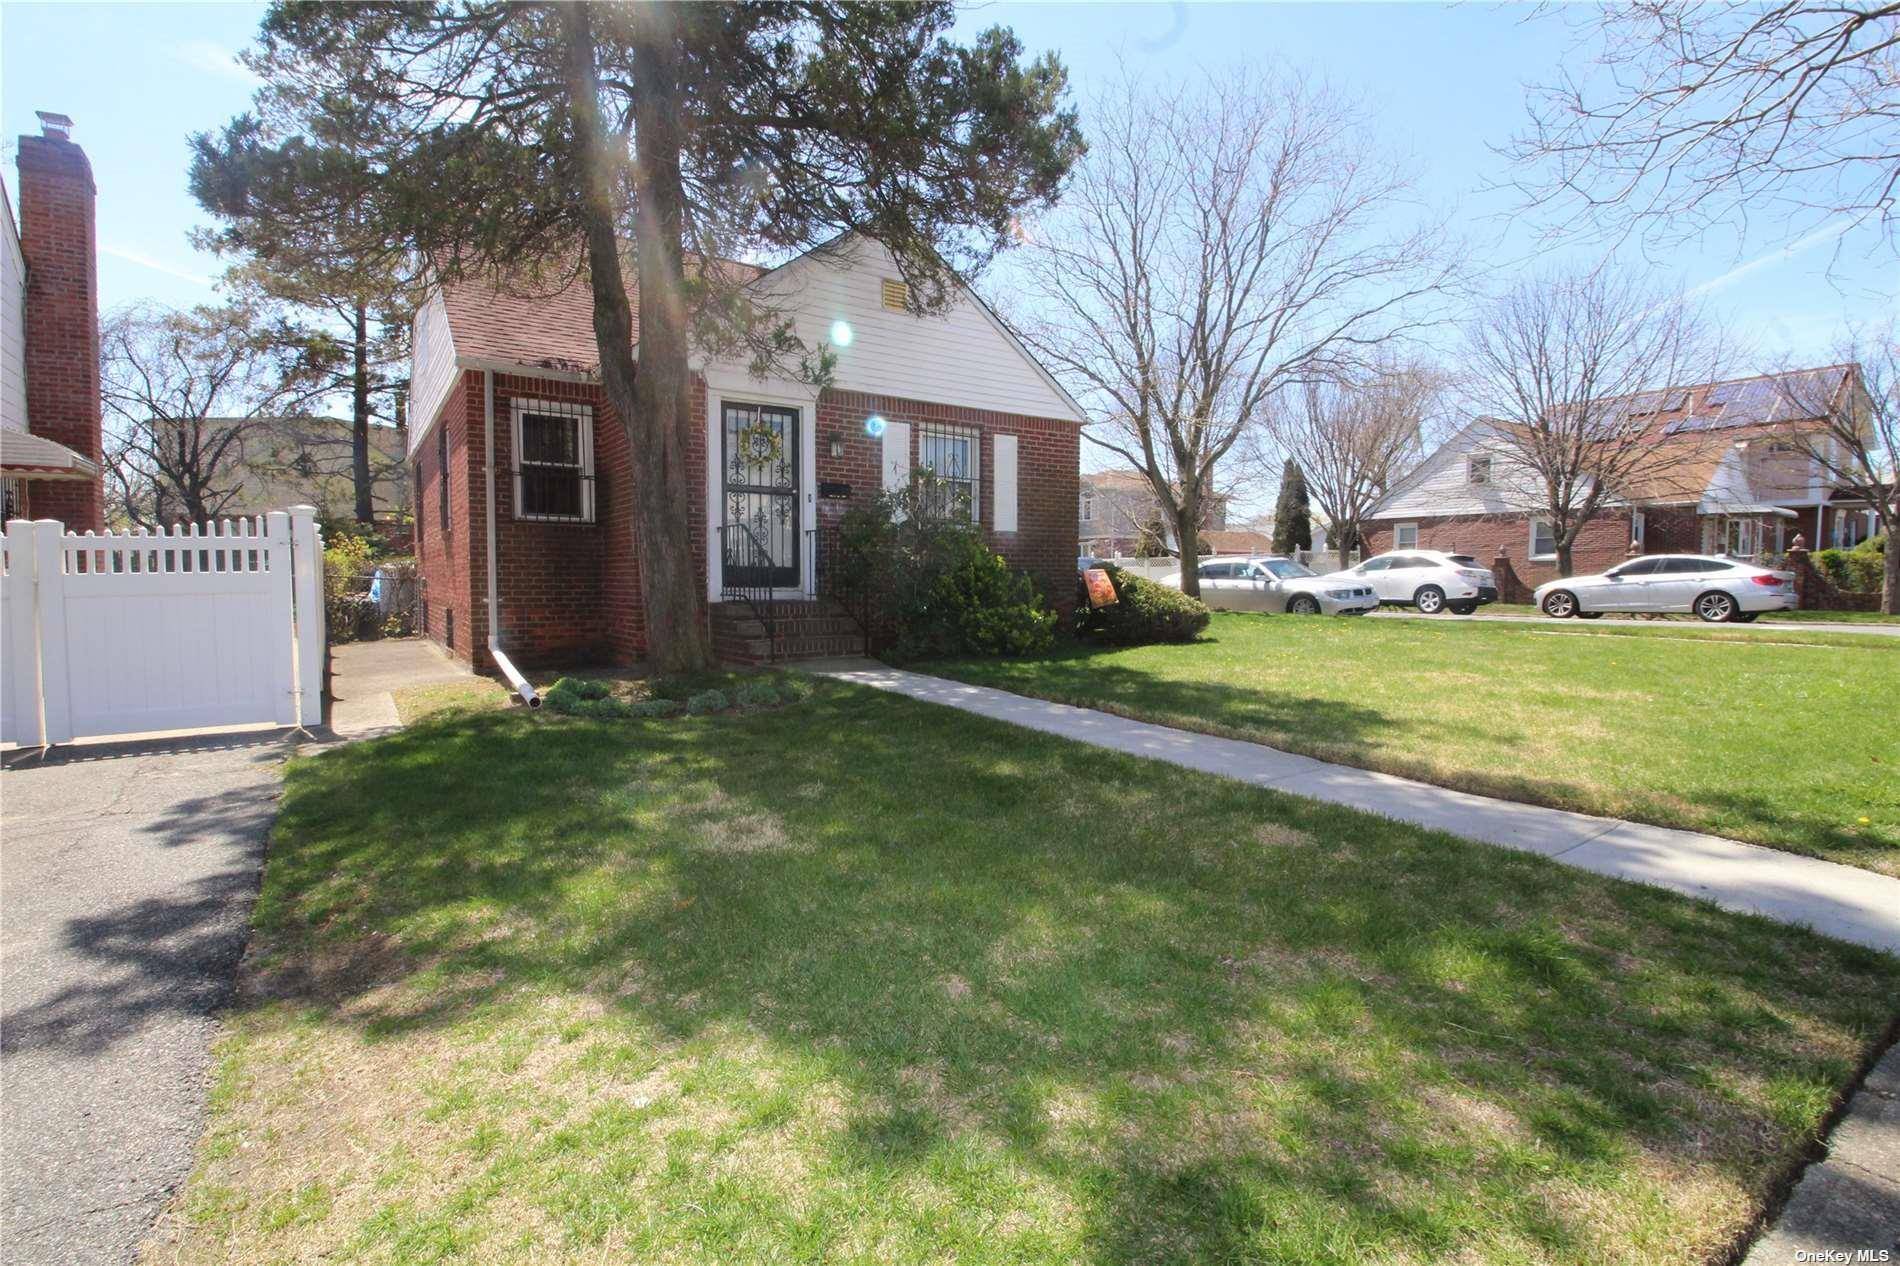 Welcome to Laurelton Queens this 3 bedroom cape is just what you have been looking for.